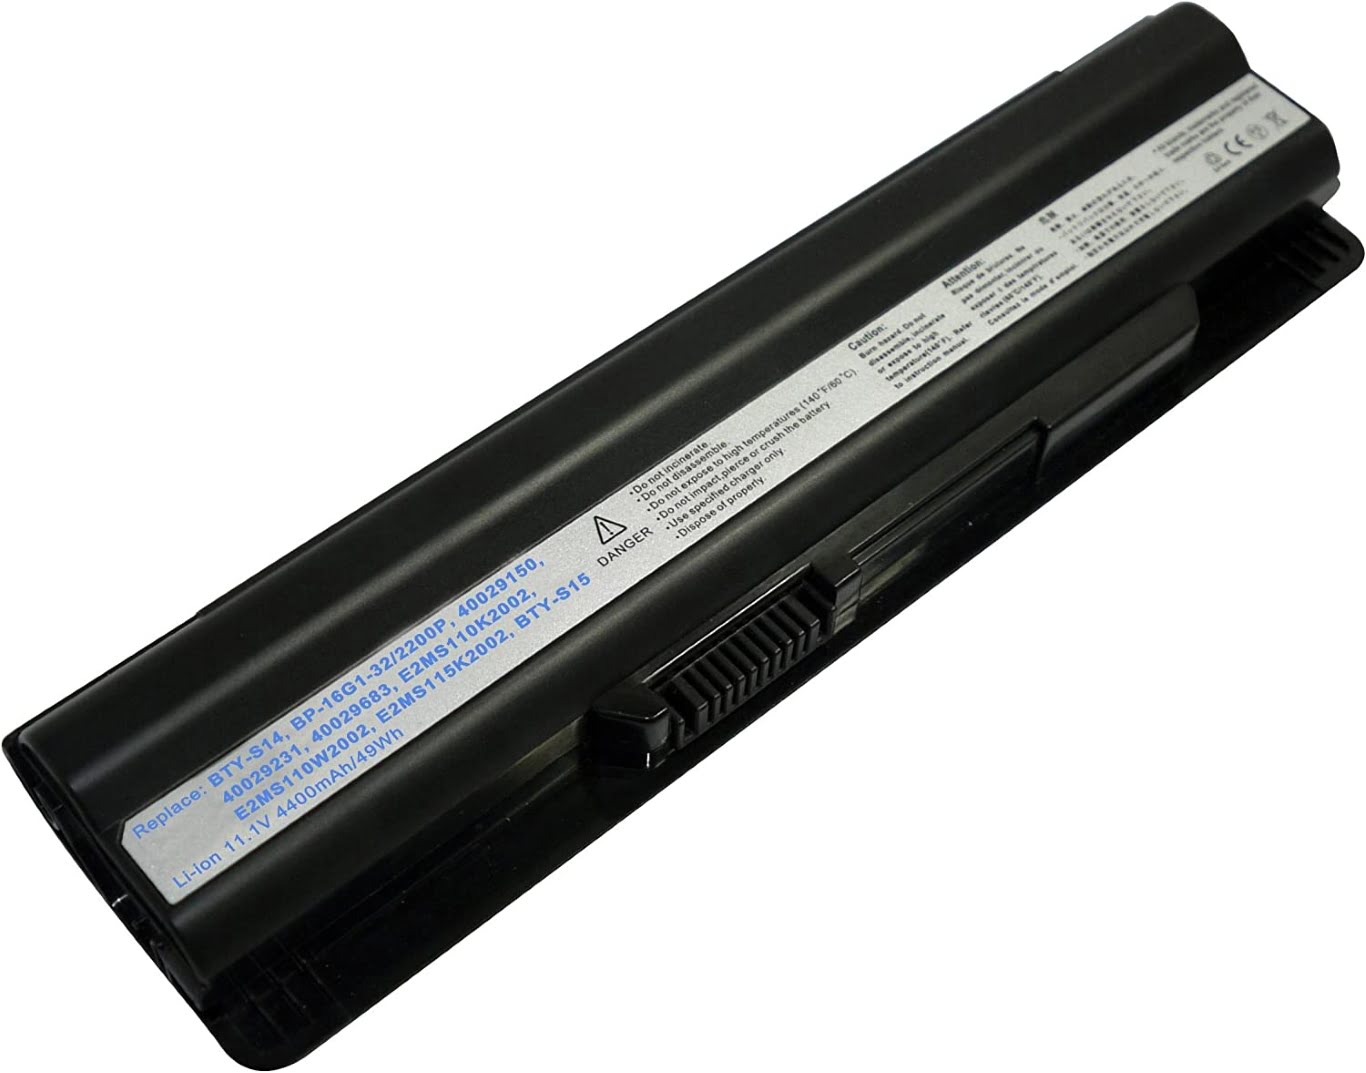 40029150, 40029231 replacement Laptop Battery for MSI CR650, CX650, 4400mAh, 6 cells, 11.1V